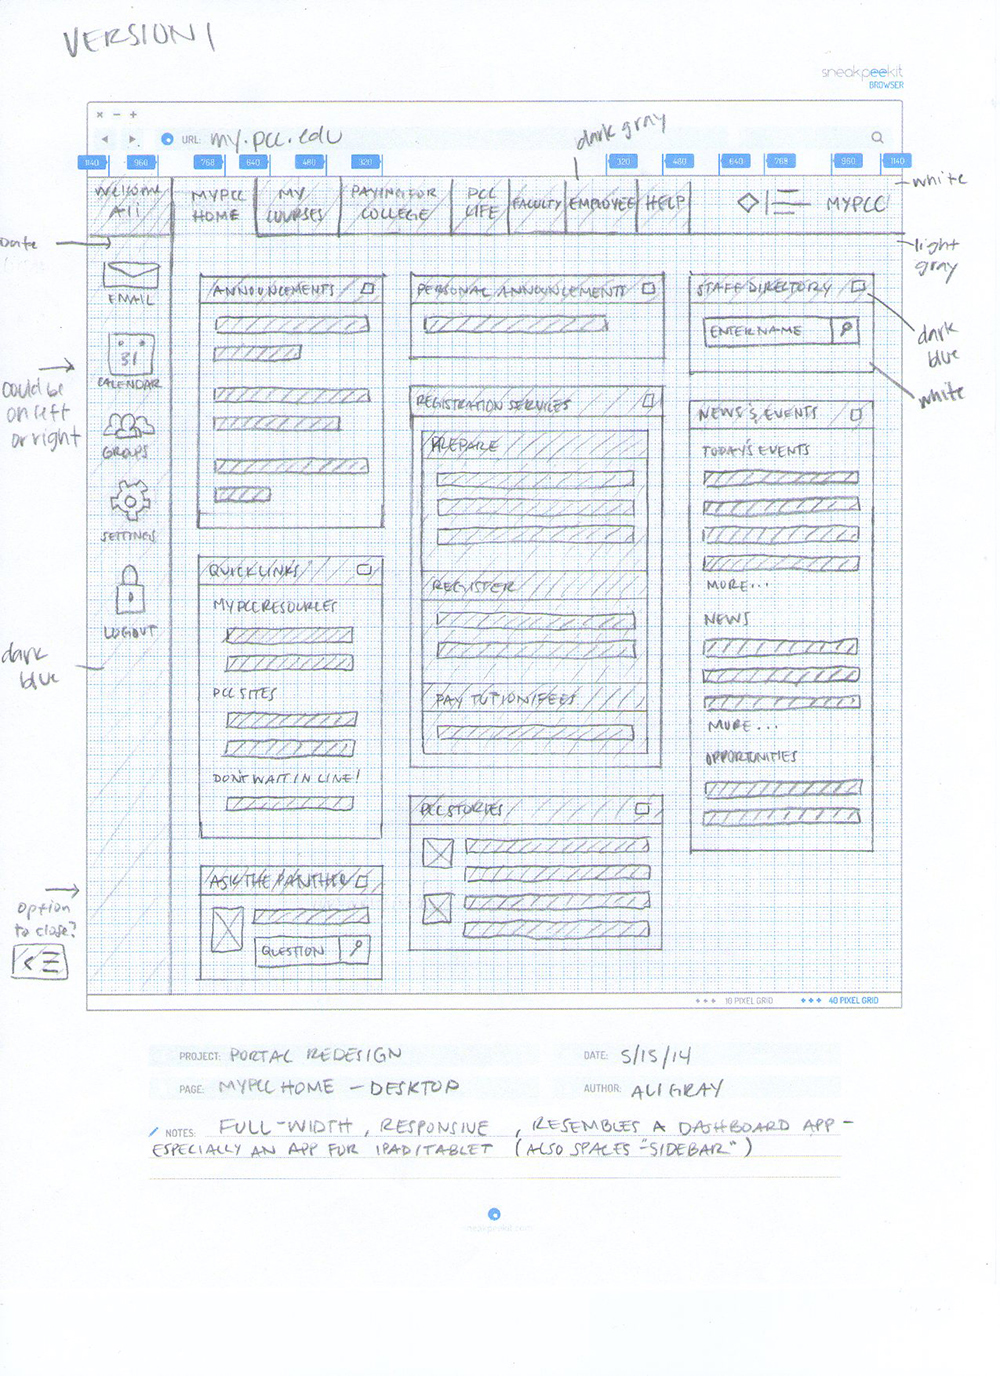 Paper and pencil wireframe